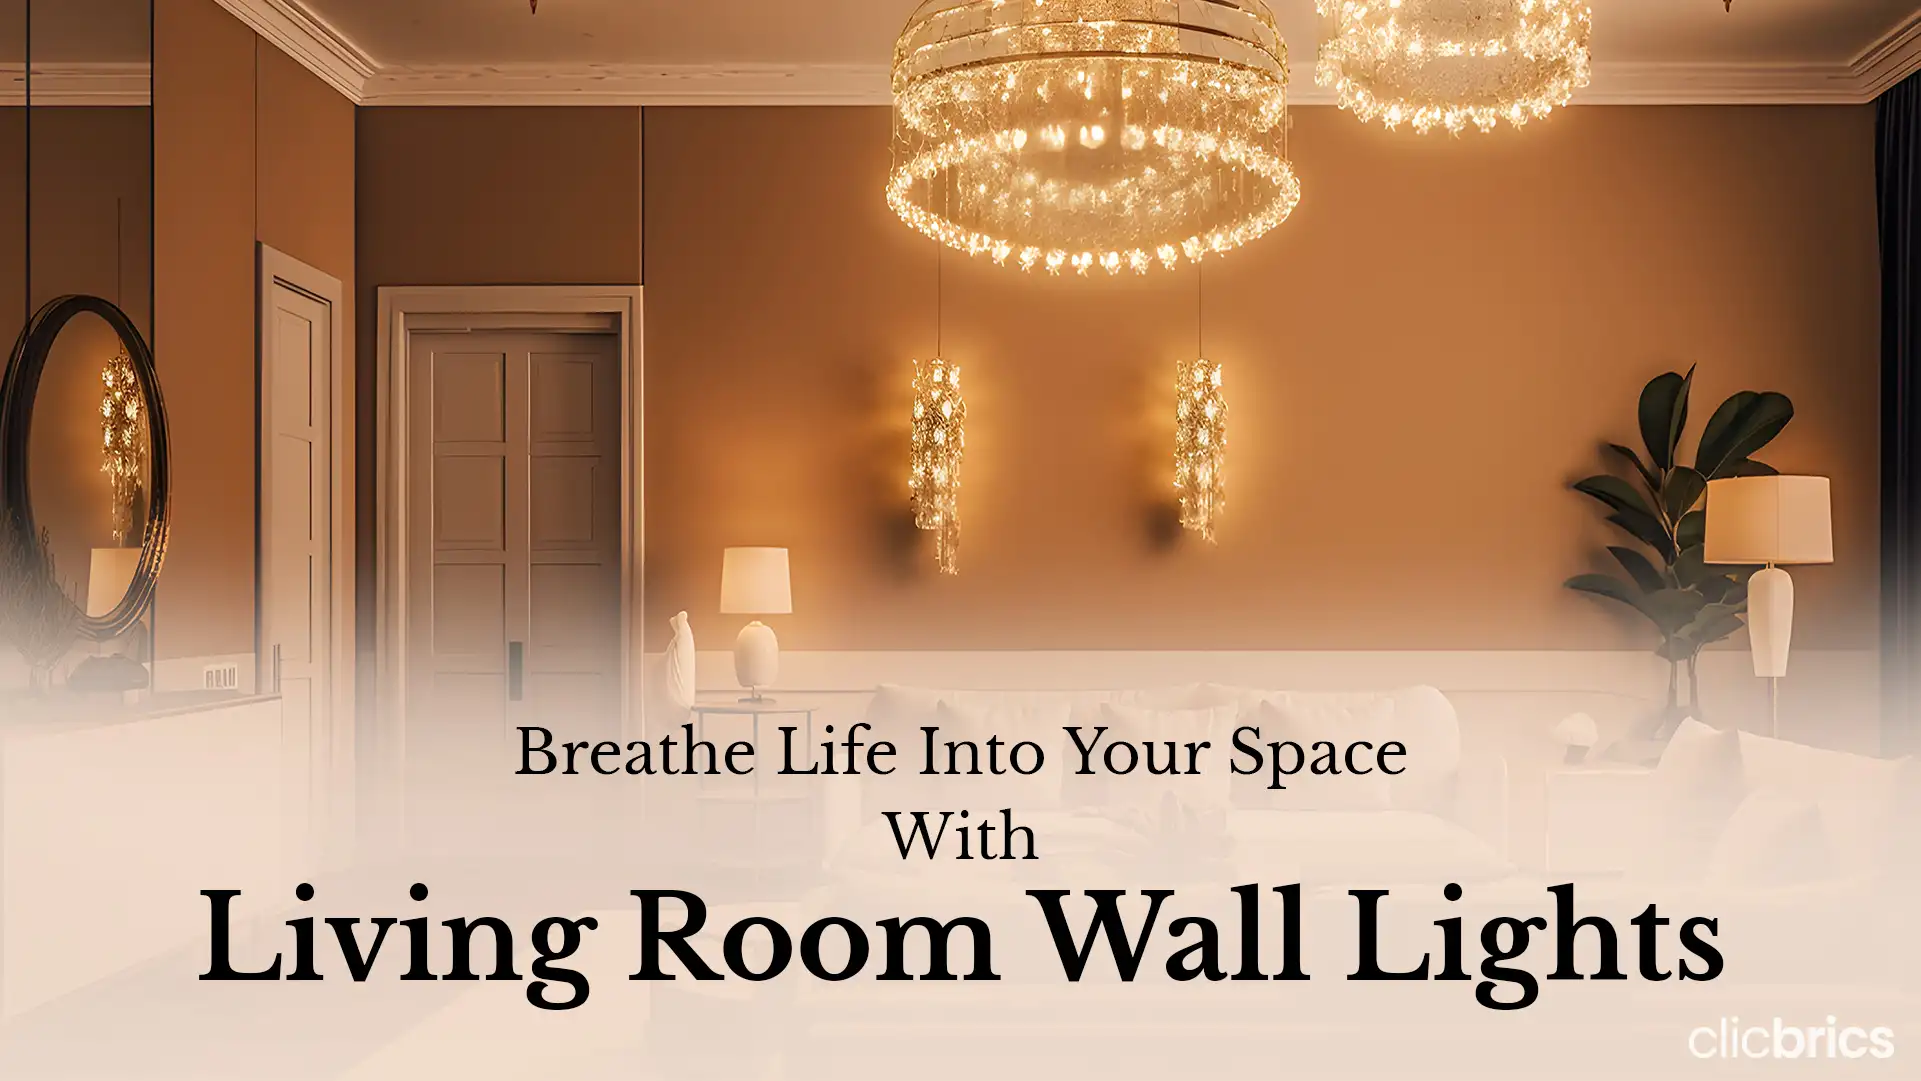 Share more than 236 wall lights for drawing room latest